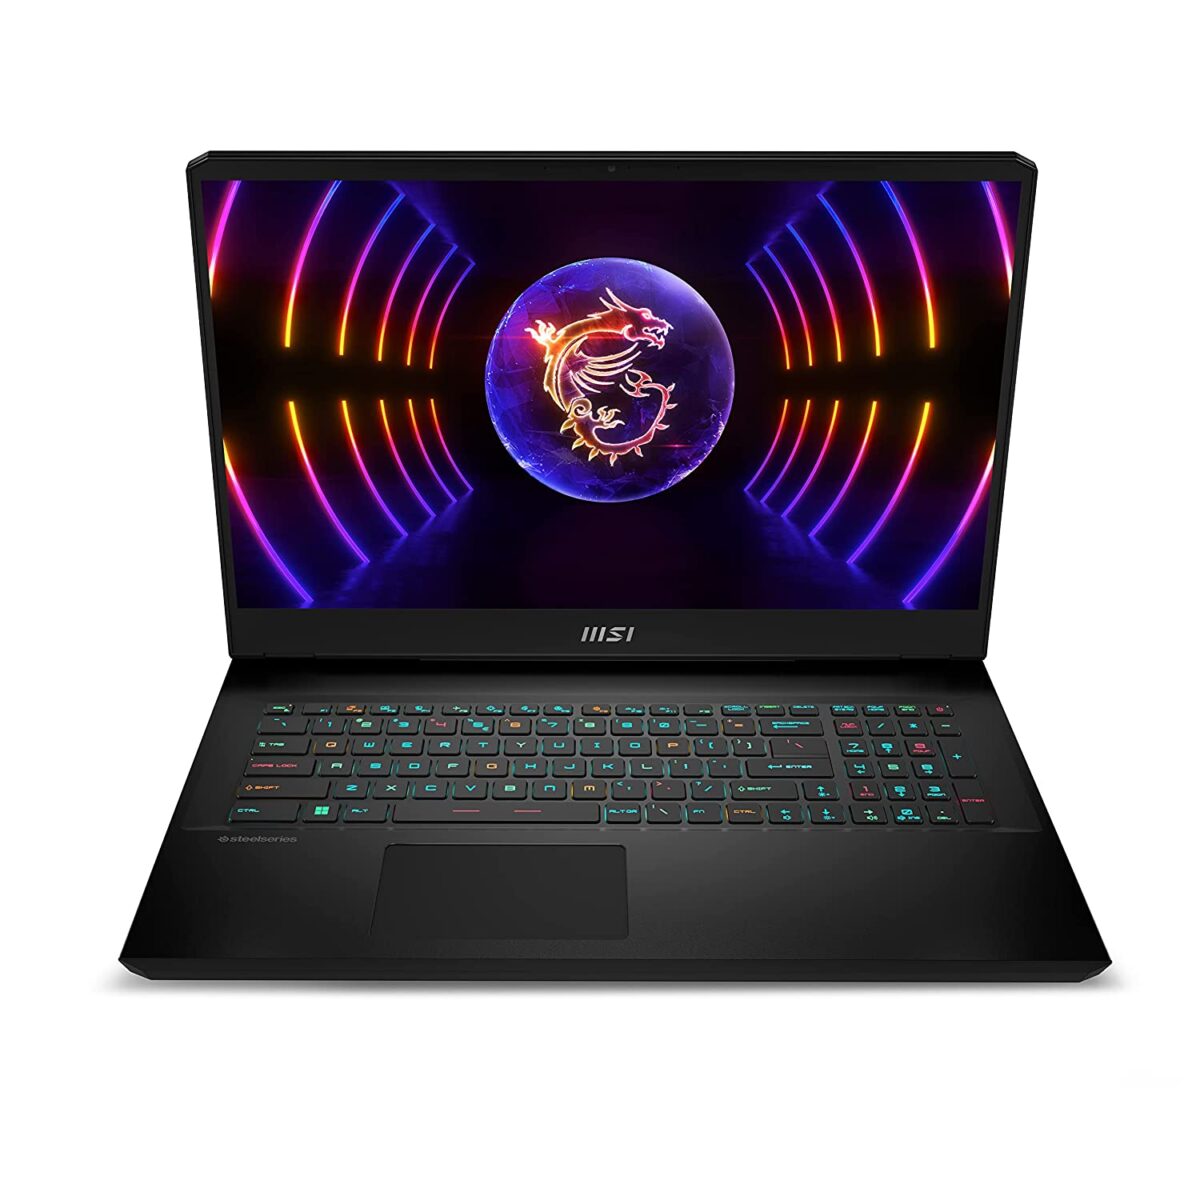 MSI has launched Vector GP77 13VG 055IN fronmt